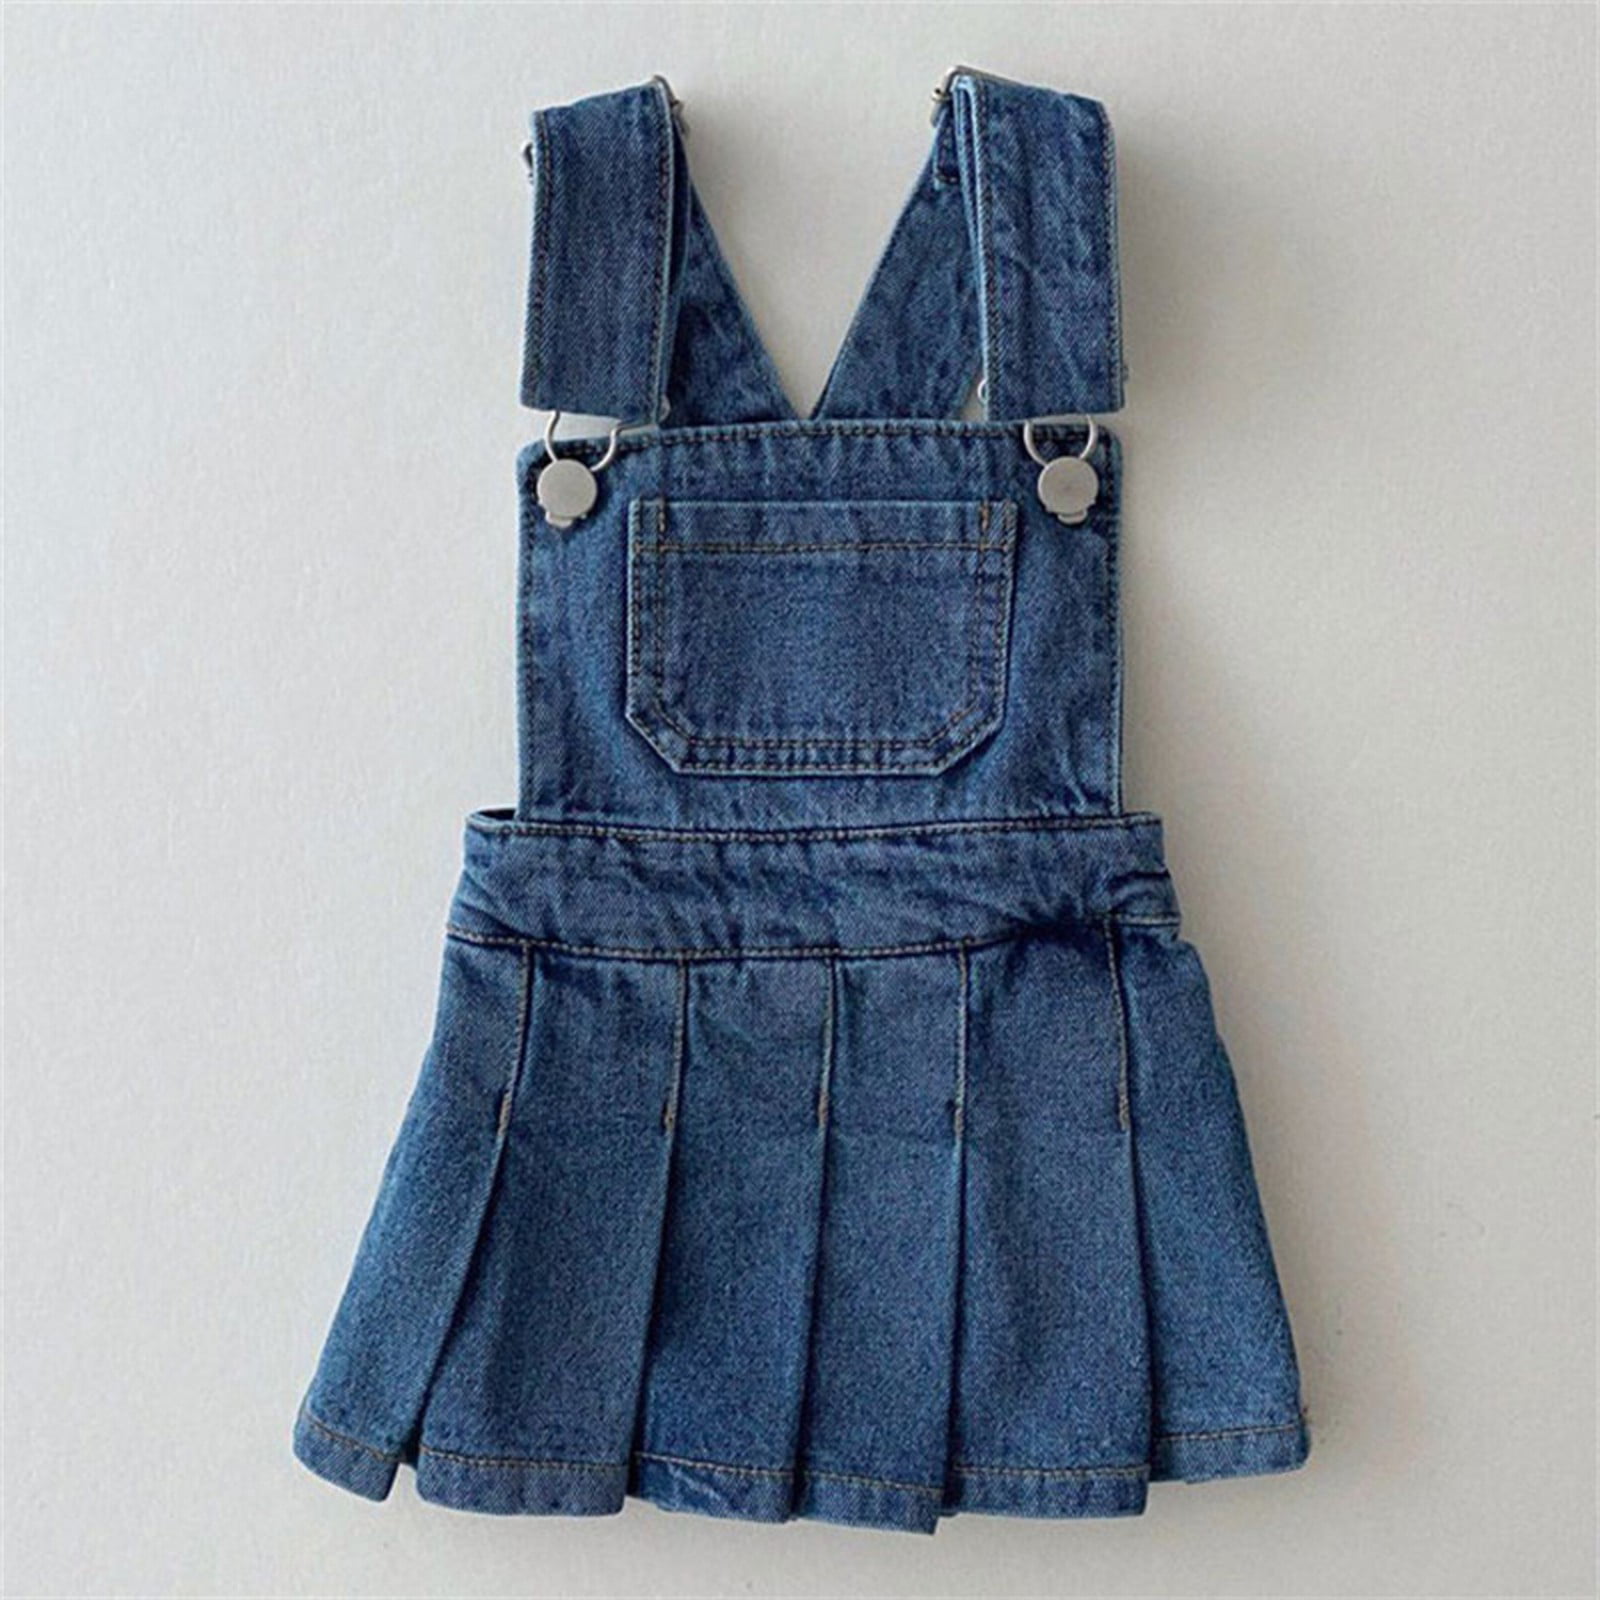 3 WAYS TO STYLE: DENIM OVERALL DRESS | OUTFIT IDEAS - YouTube